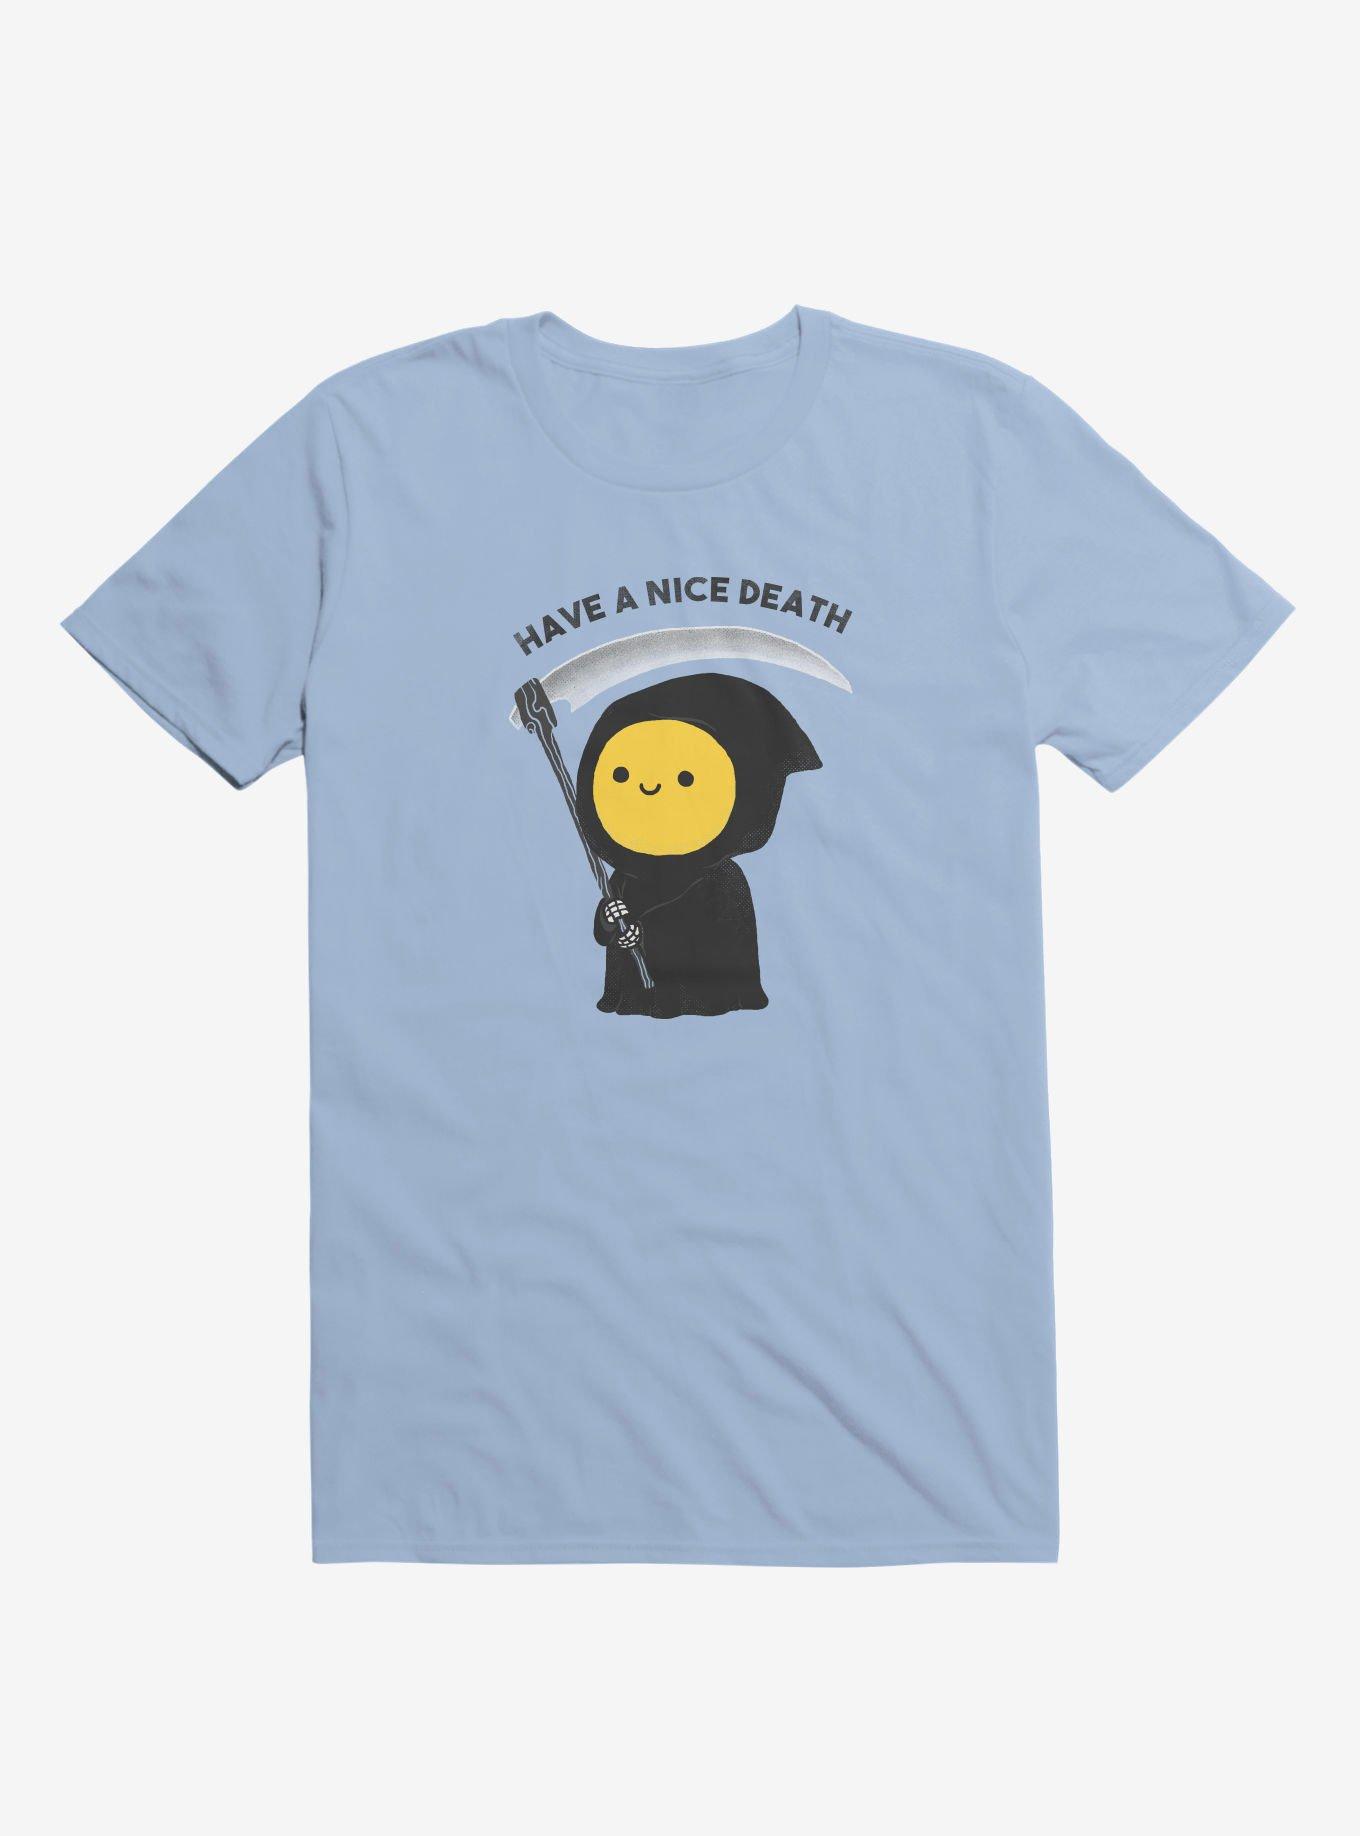 Have a nice death T-Shirt